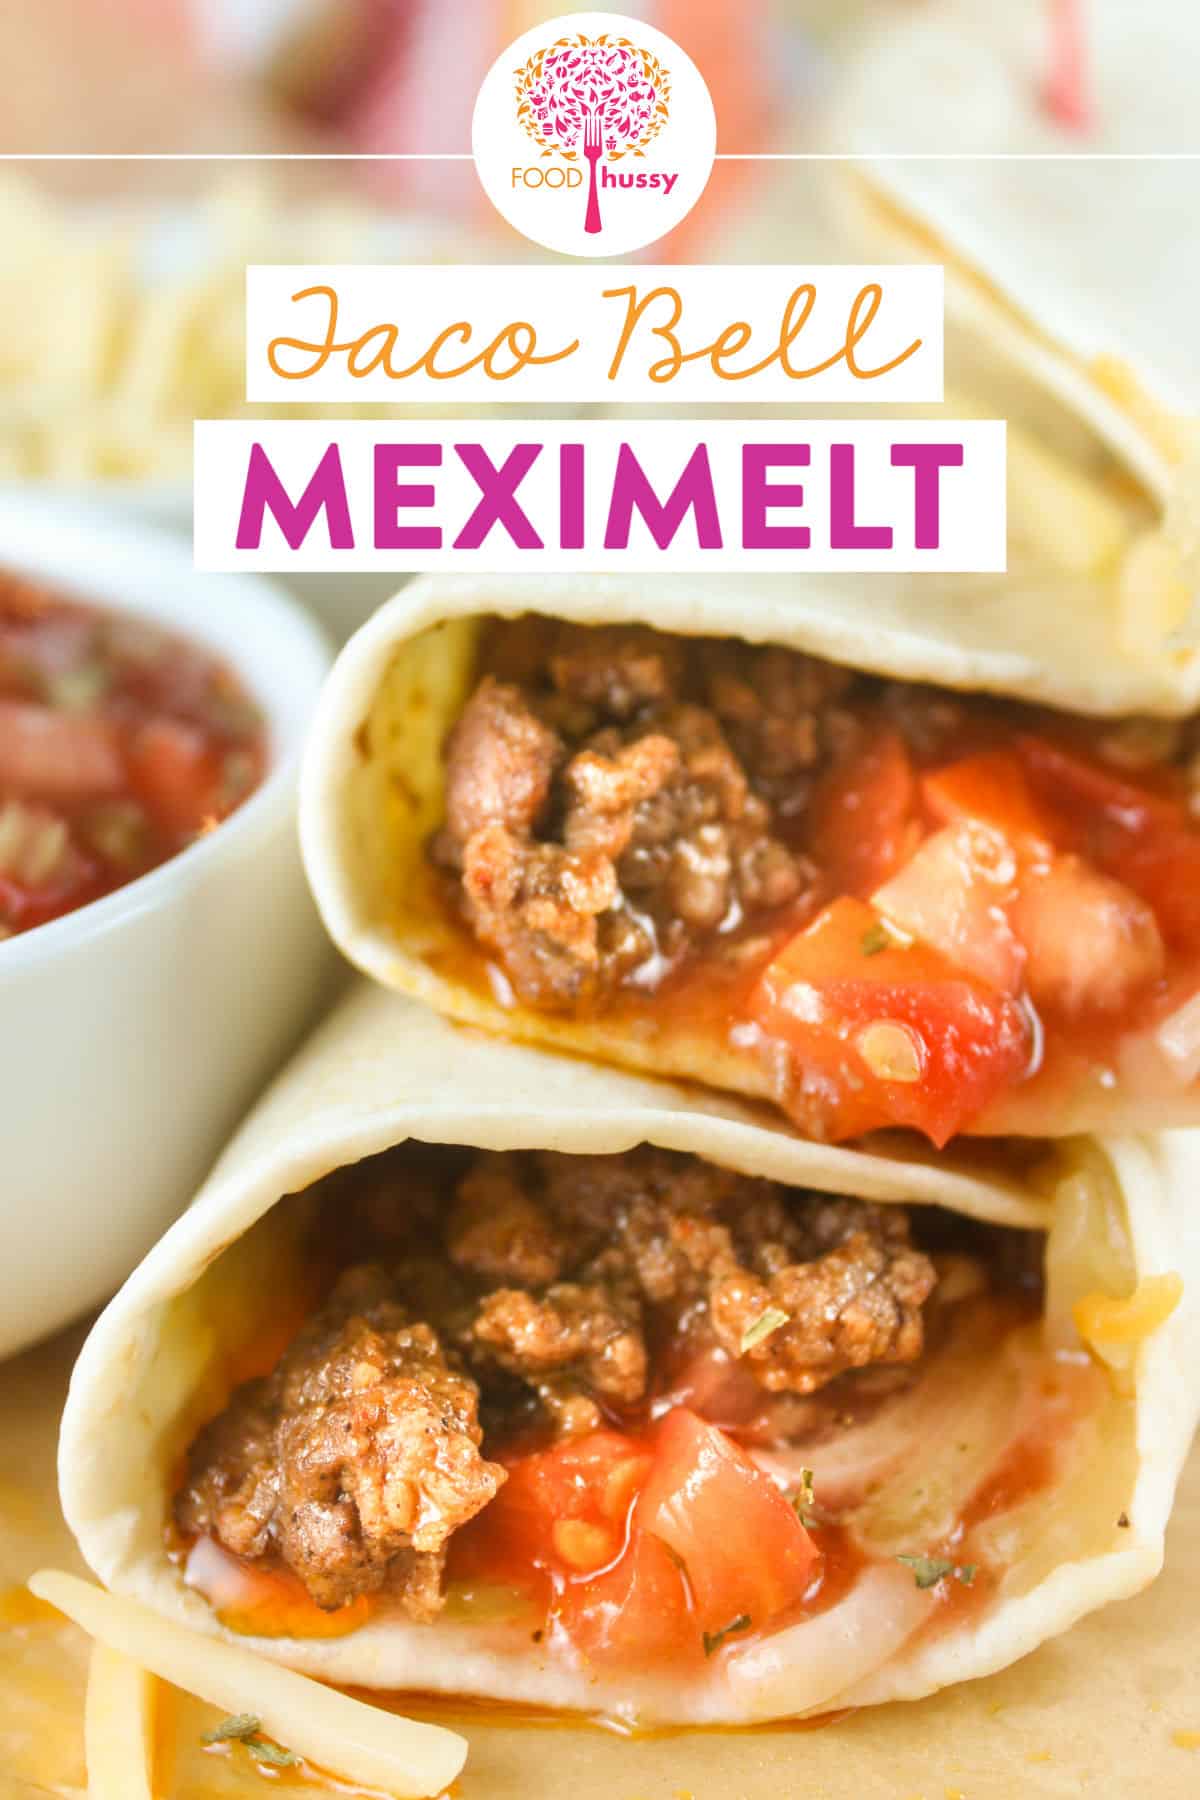 The Meximelt at Taco Bell was one of my absolute favorite menu items - but it's no longer on the menu! Ugh - the tragedy! This Copycat Taco Bell Meximelt brings it back to your kitchen by combining a taco and a quesadilla into a melty burrito of goodness.  via @foodhussy